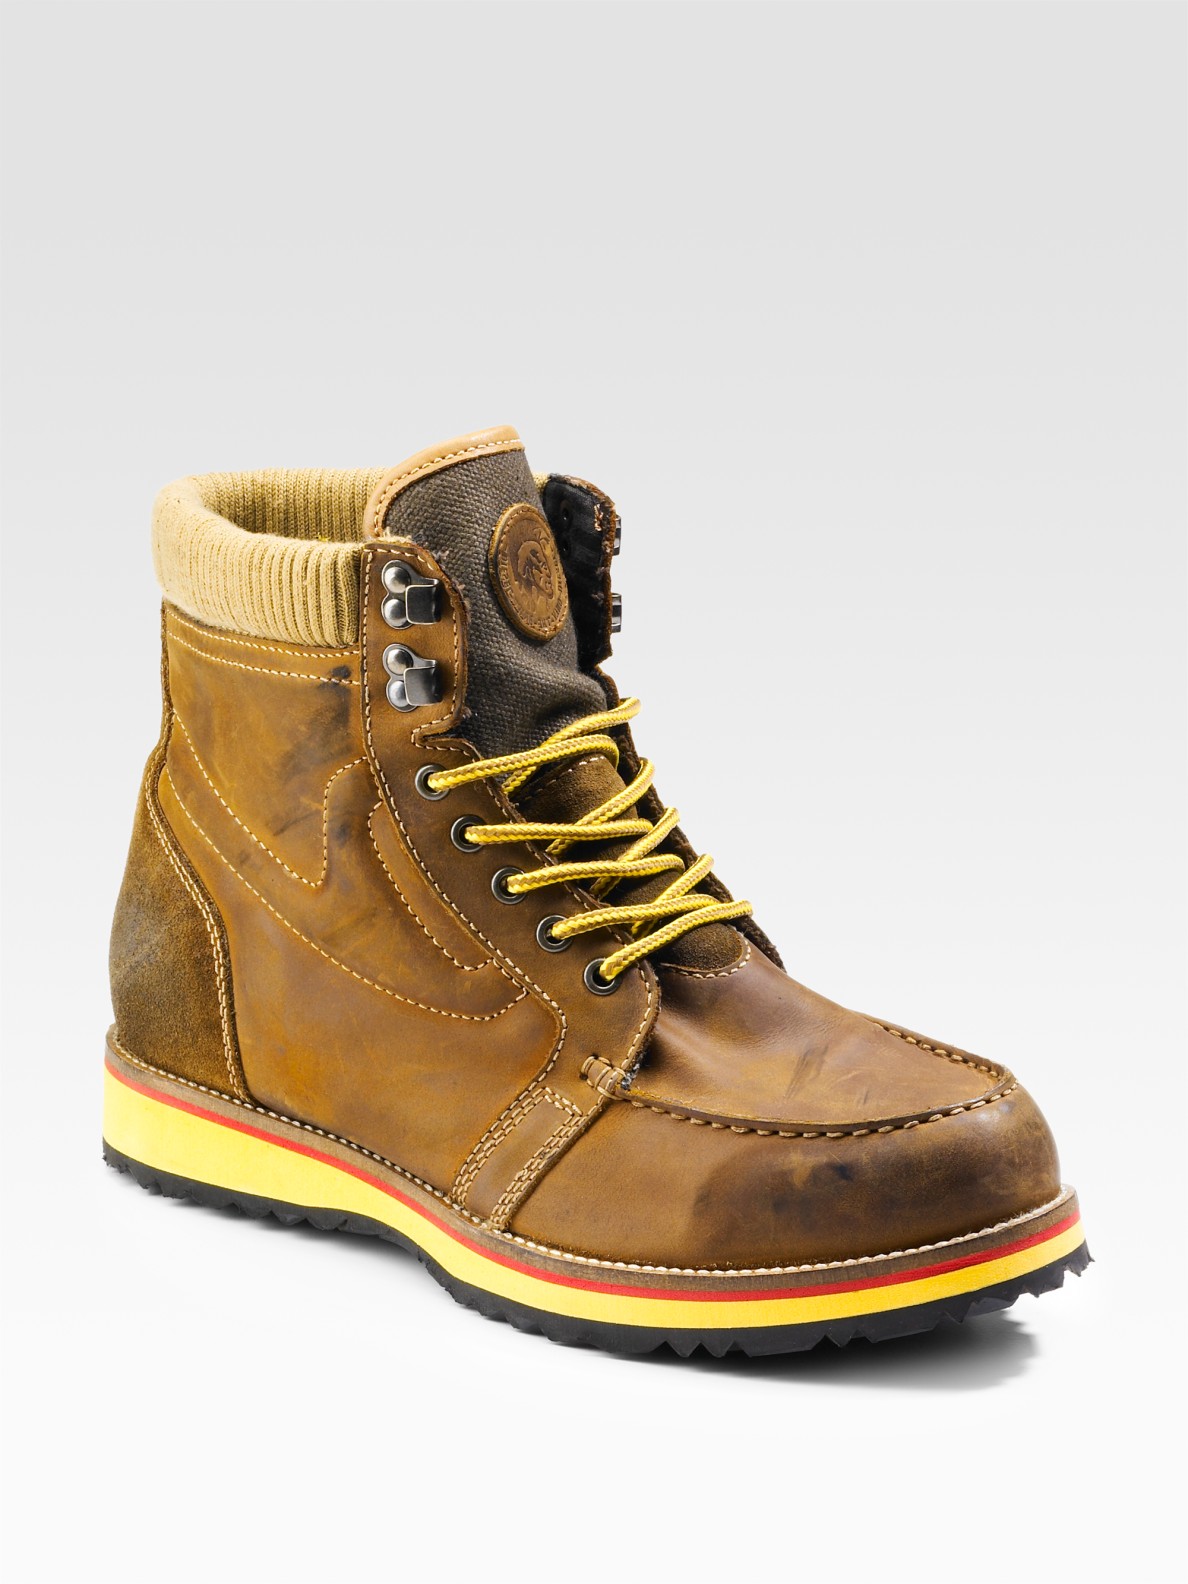 Lyst - Diesel Catch 78 Awol Ankle Boots in Yellow for Men